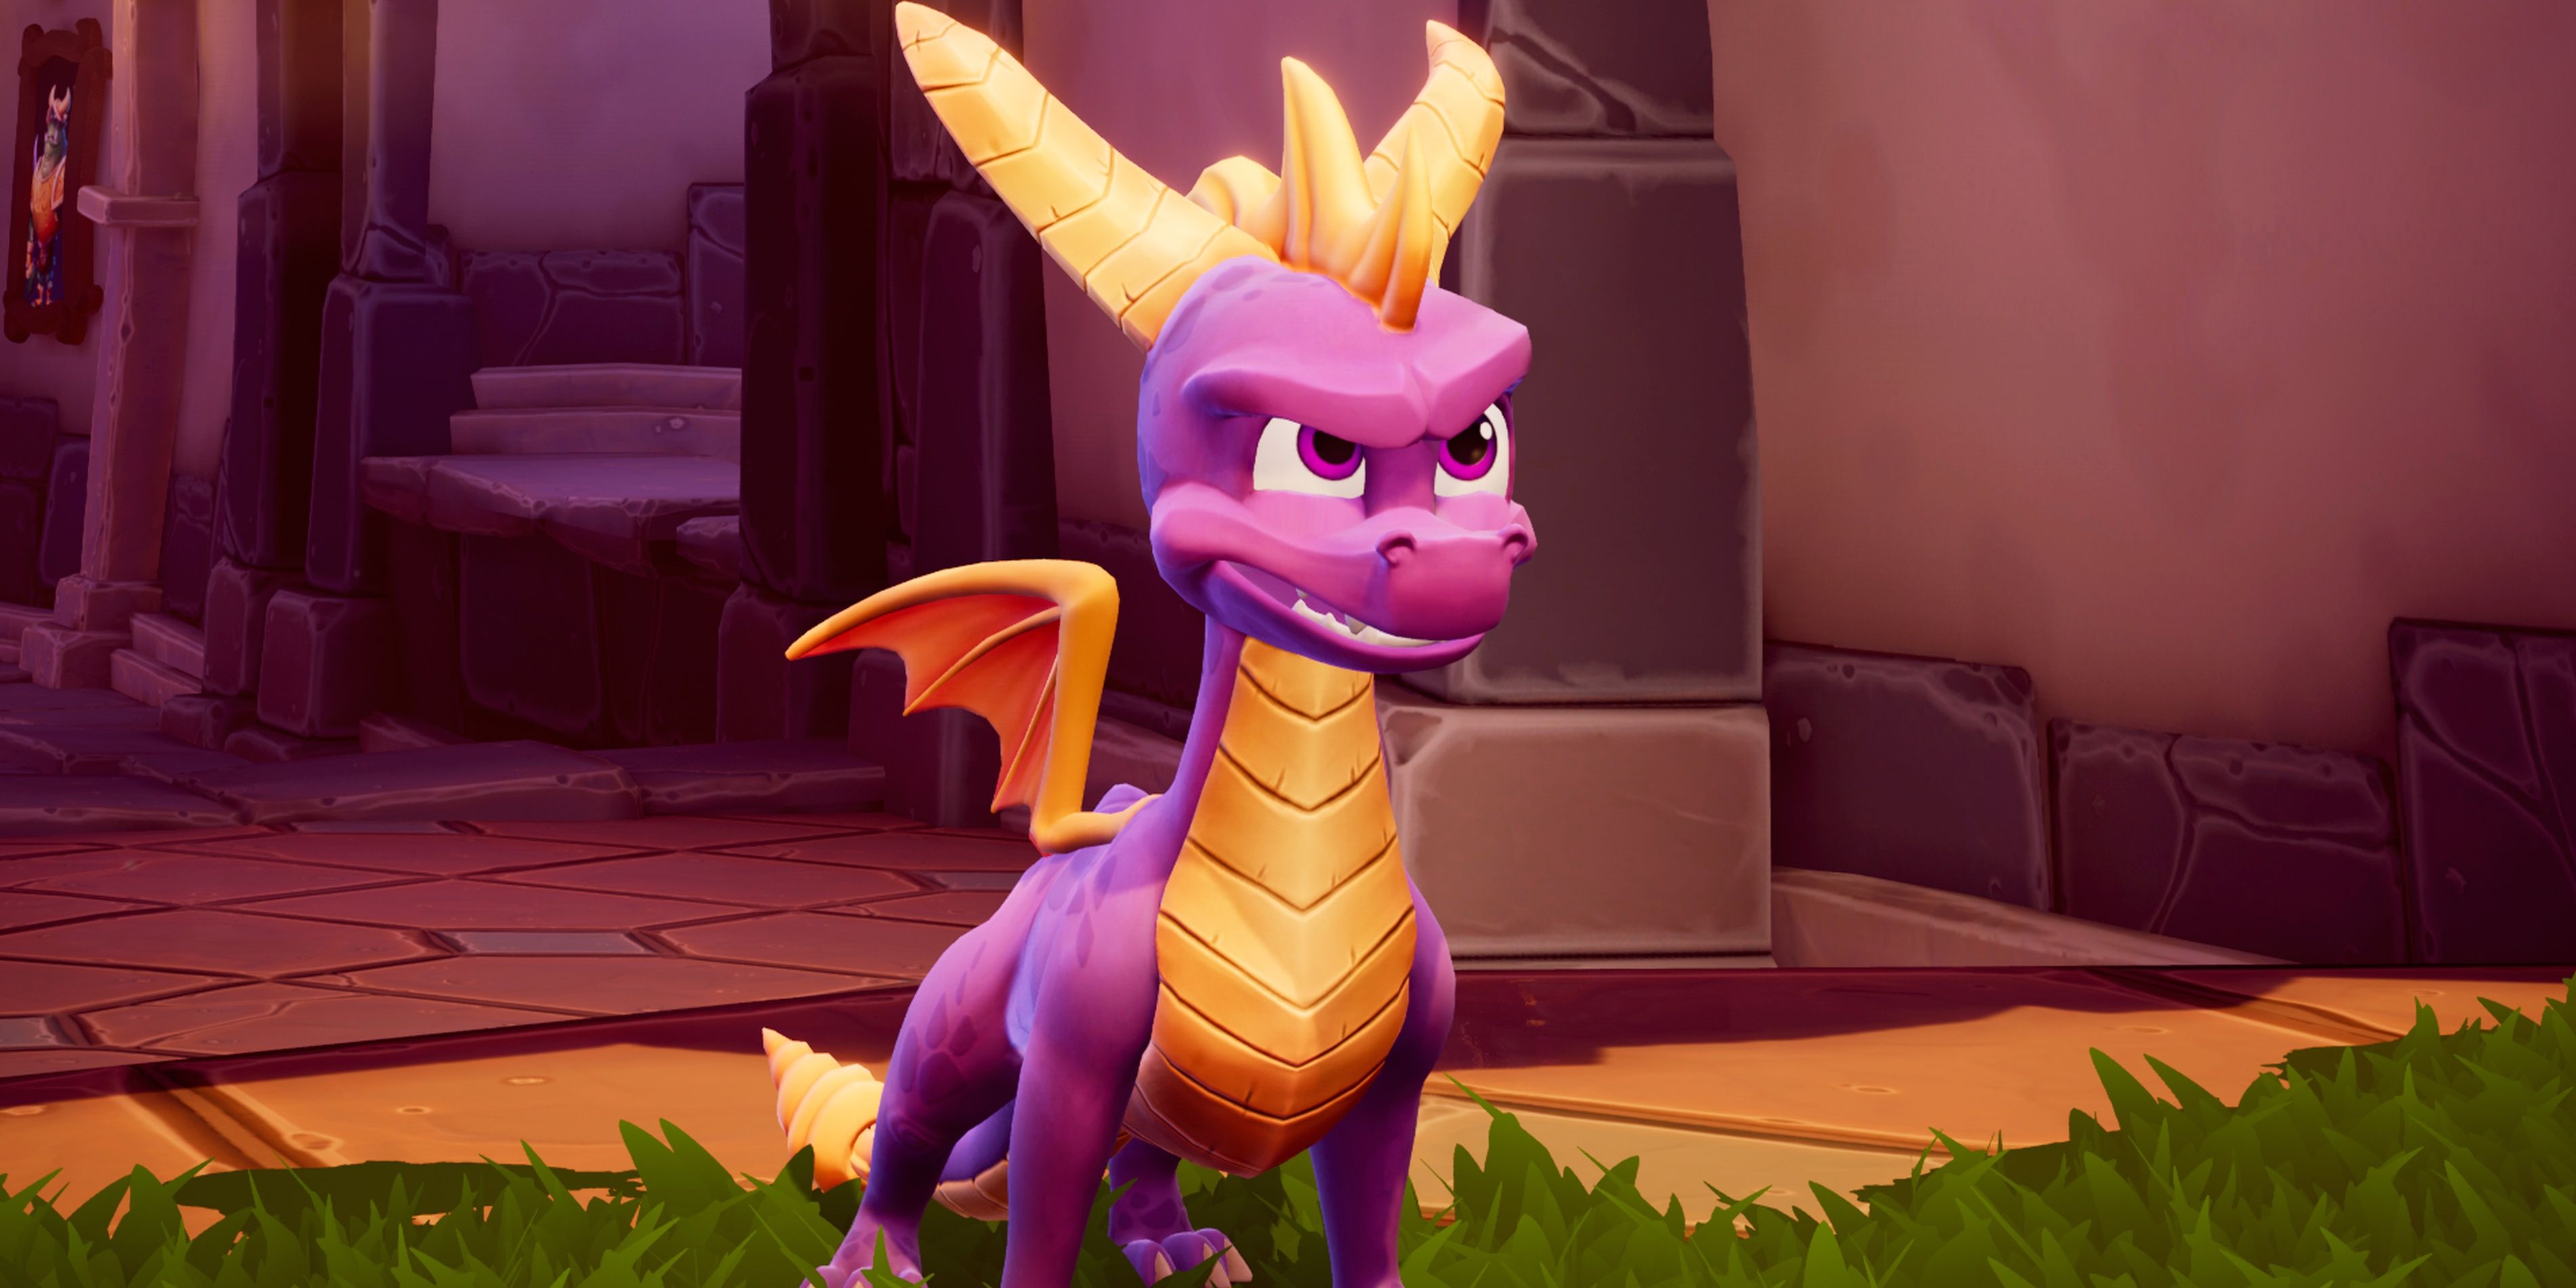 Spyro the Dragon from the video game series